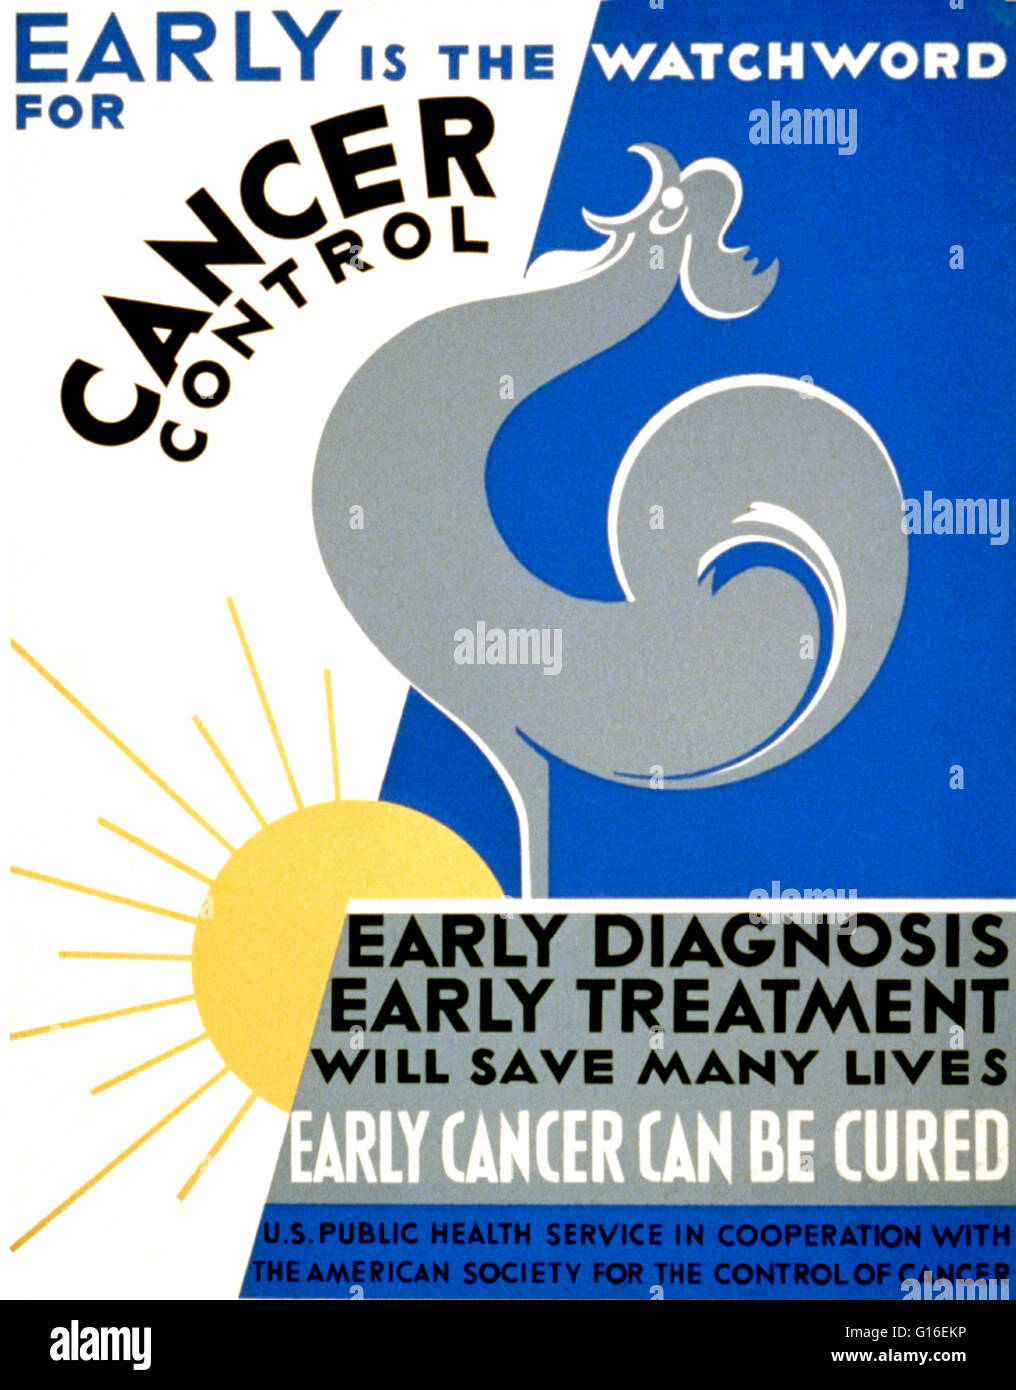 Entitled: 'Early is the watchword for cancer control. Early diagnosis, early treatment will save many lives. Early cancer can be cured'. Poster promoting early diagnosis and treatment for cancer, showing a rooster crowing at sunrise. The Federal Art Proje Stock Photo